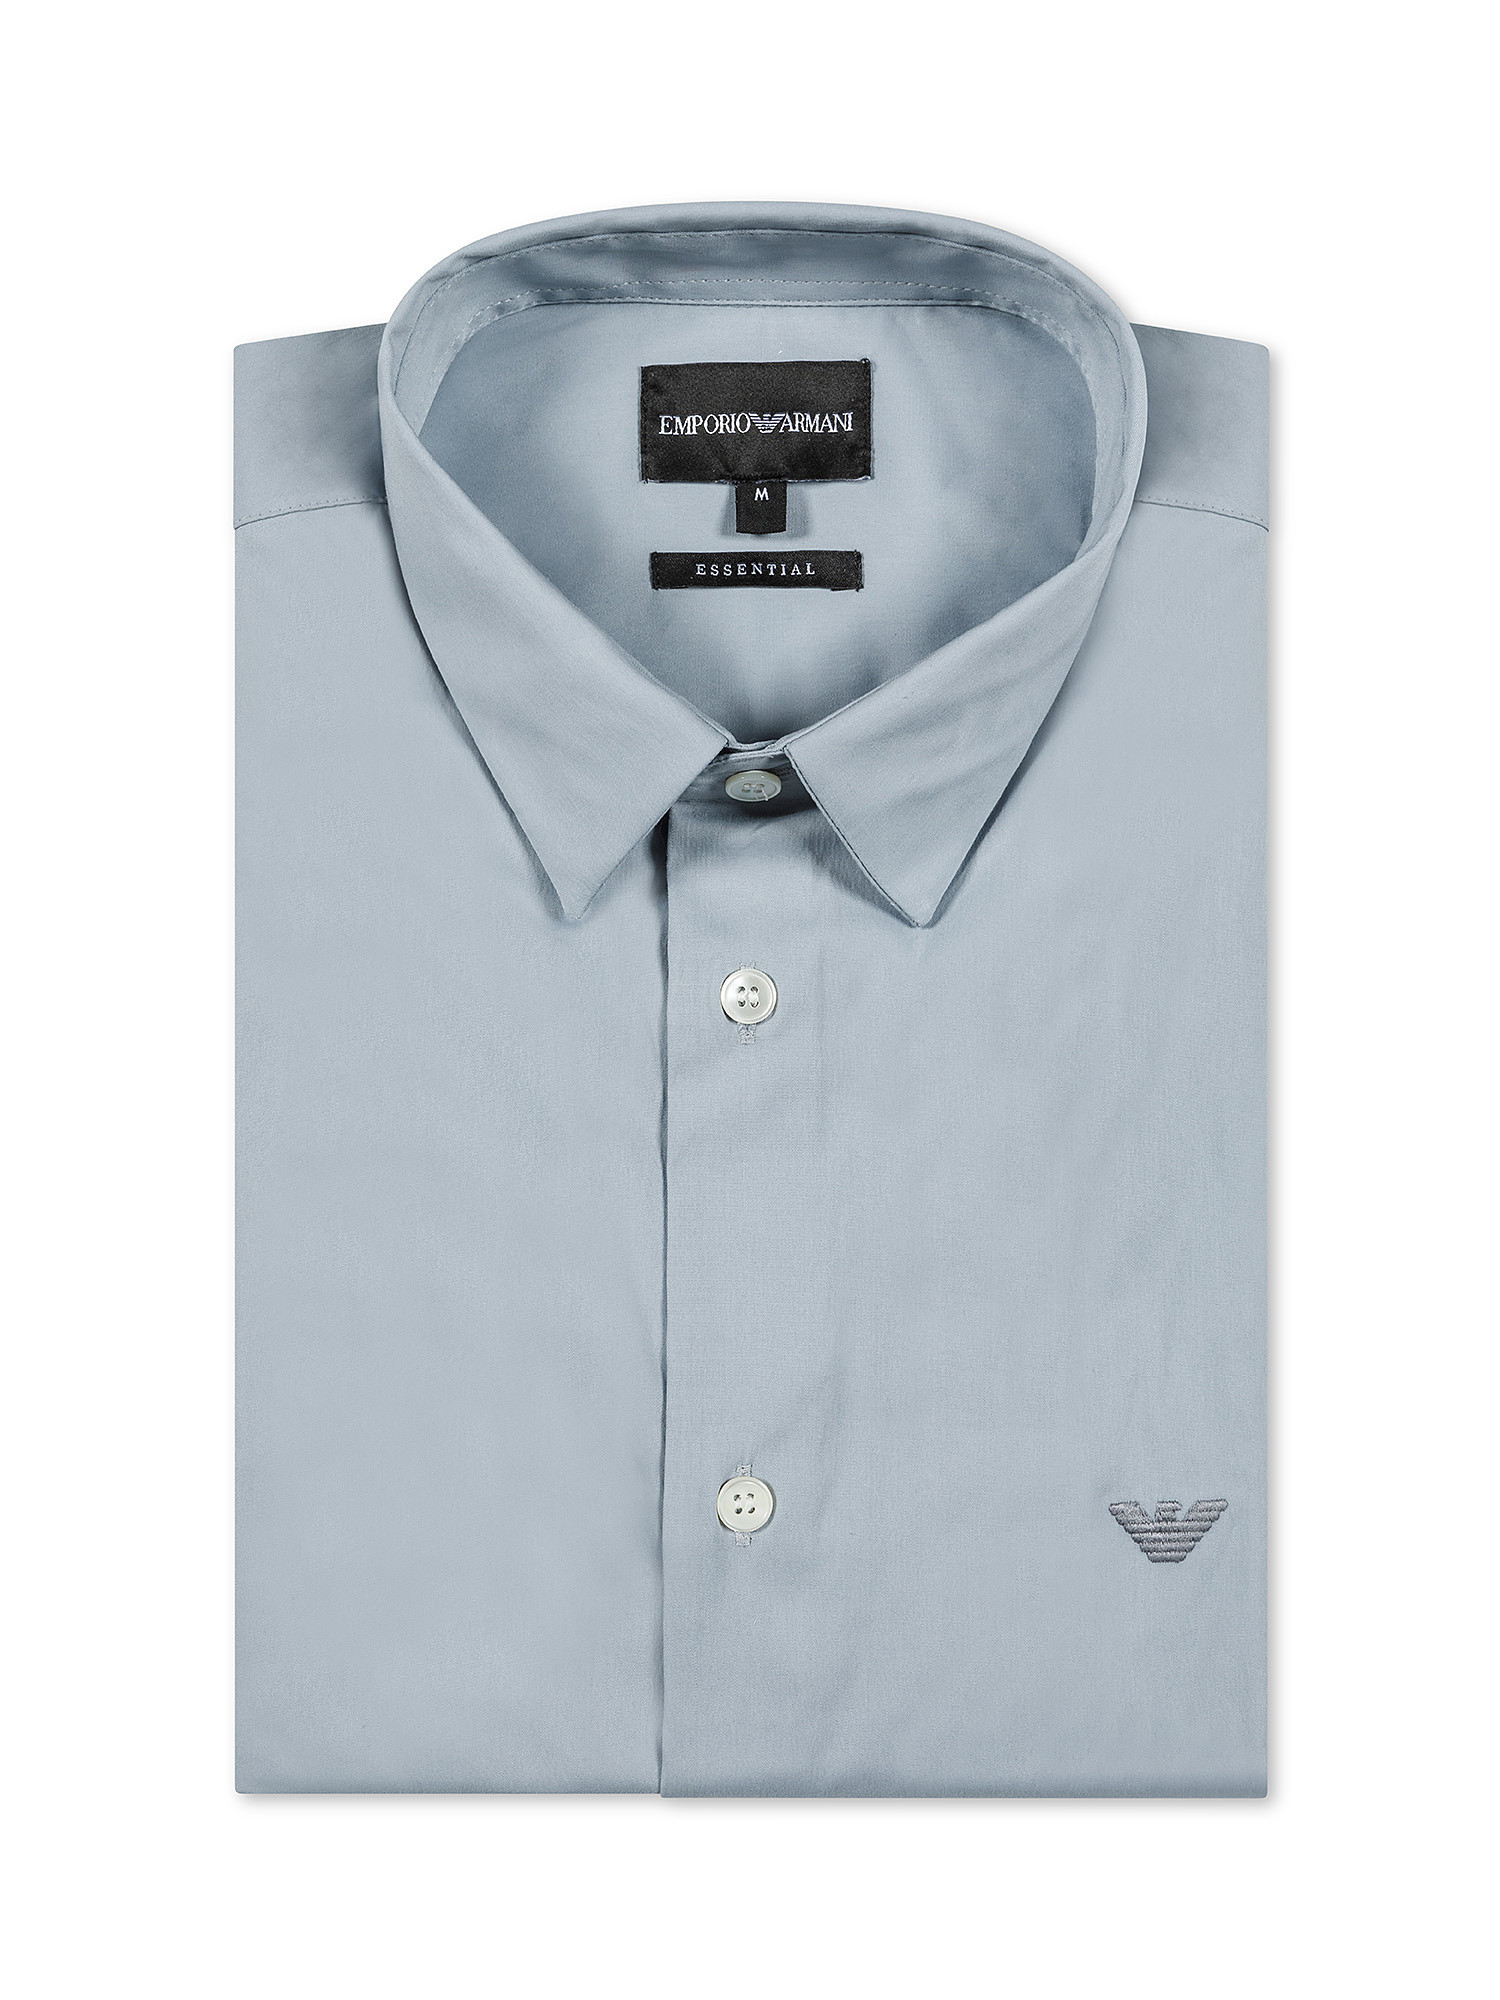 Emporio Armani - Shirt with embroidered logo, Light Blue, large image number 0